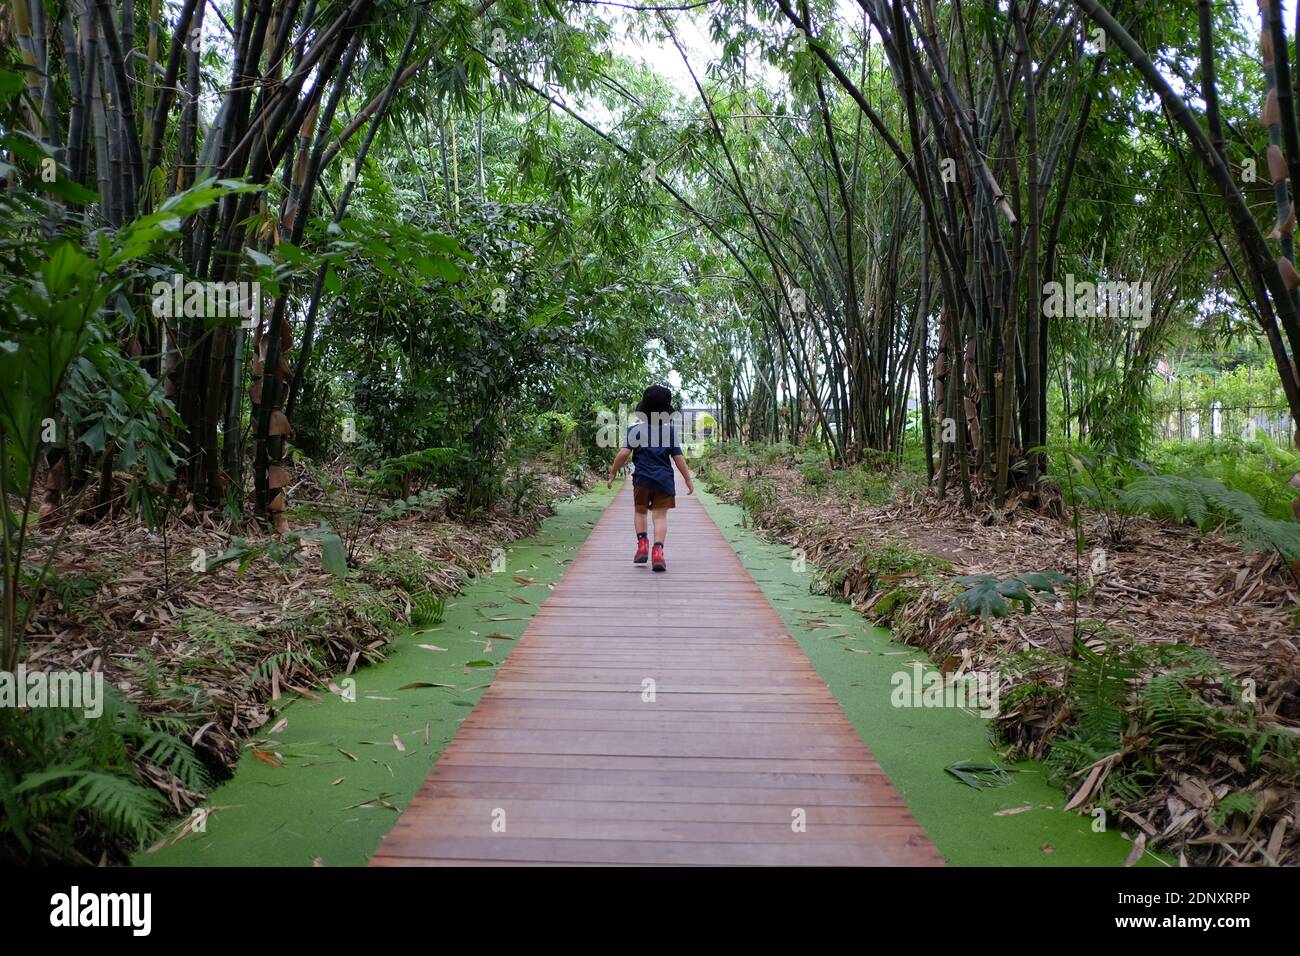 Rear View Of Girl Walking On Footpath Amidst Trees In Forest Stock Photo